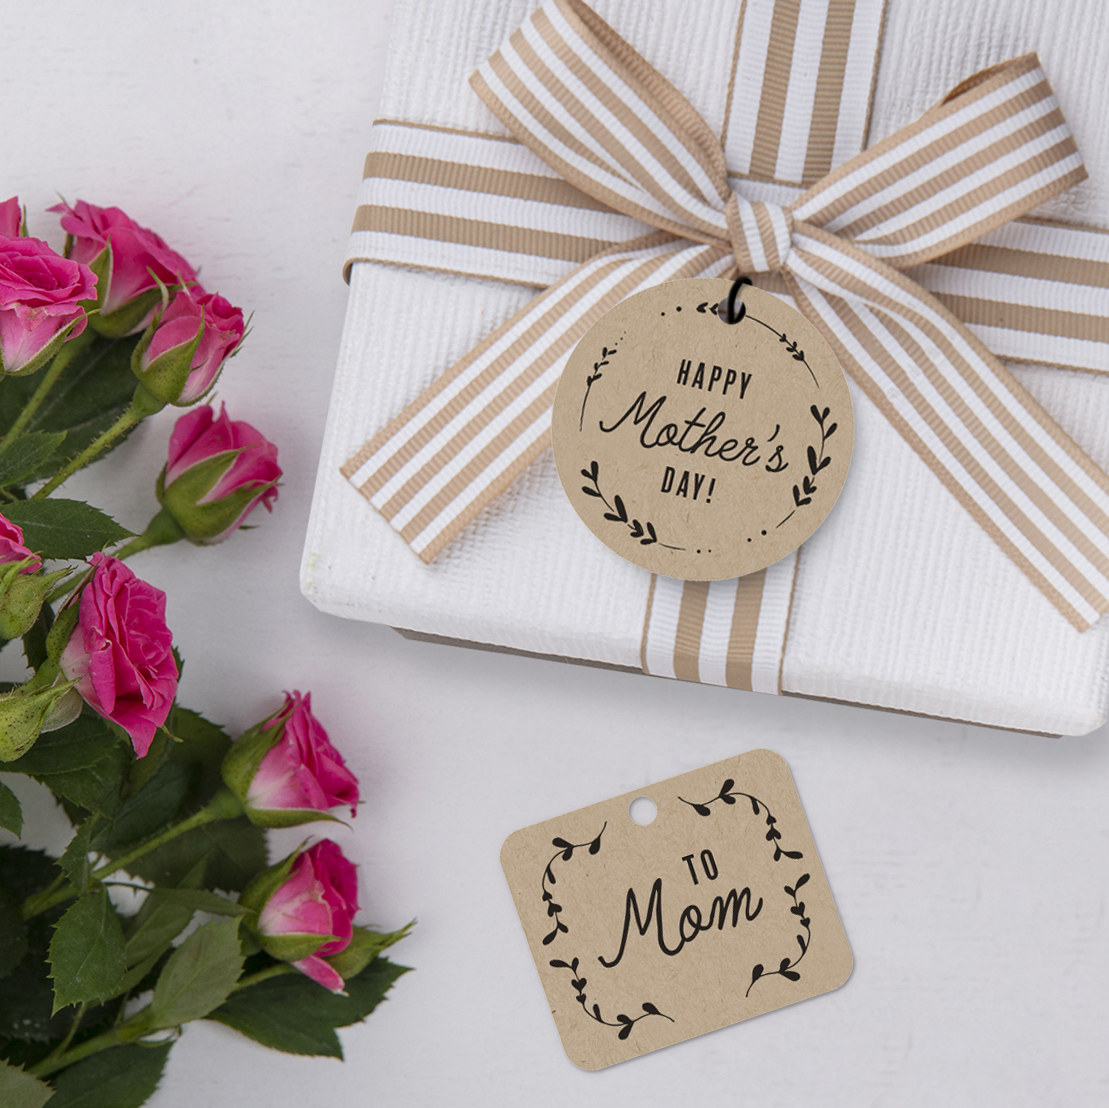 surprise-mom-with-this-beautiful-mother-s-day-card-gift-tags-free